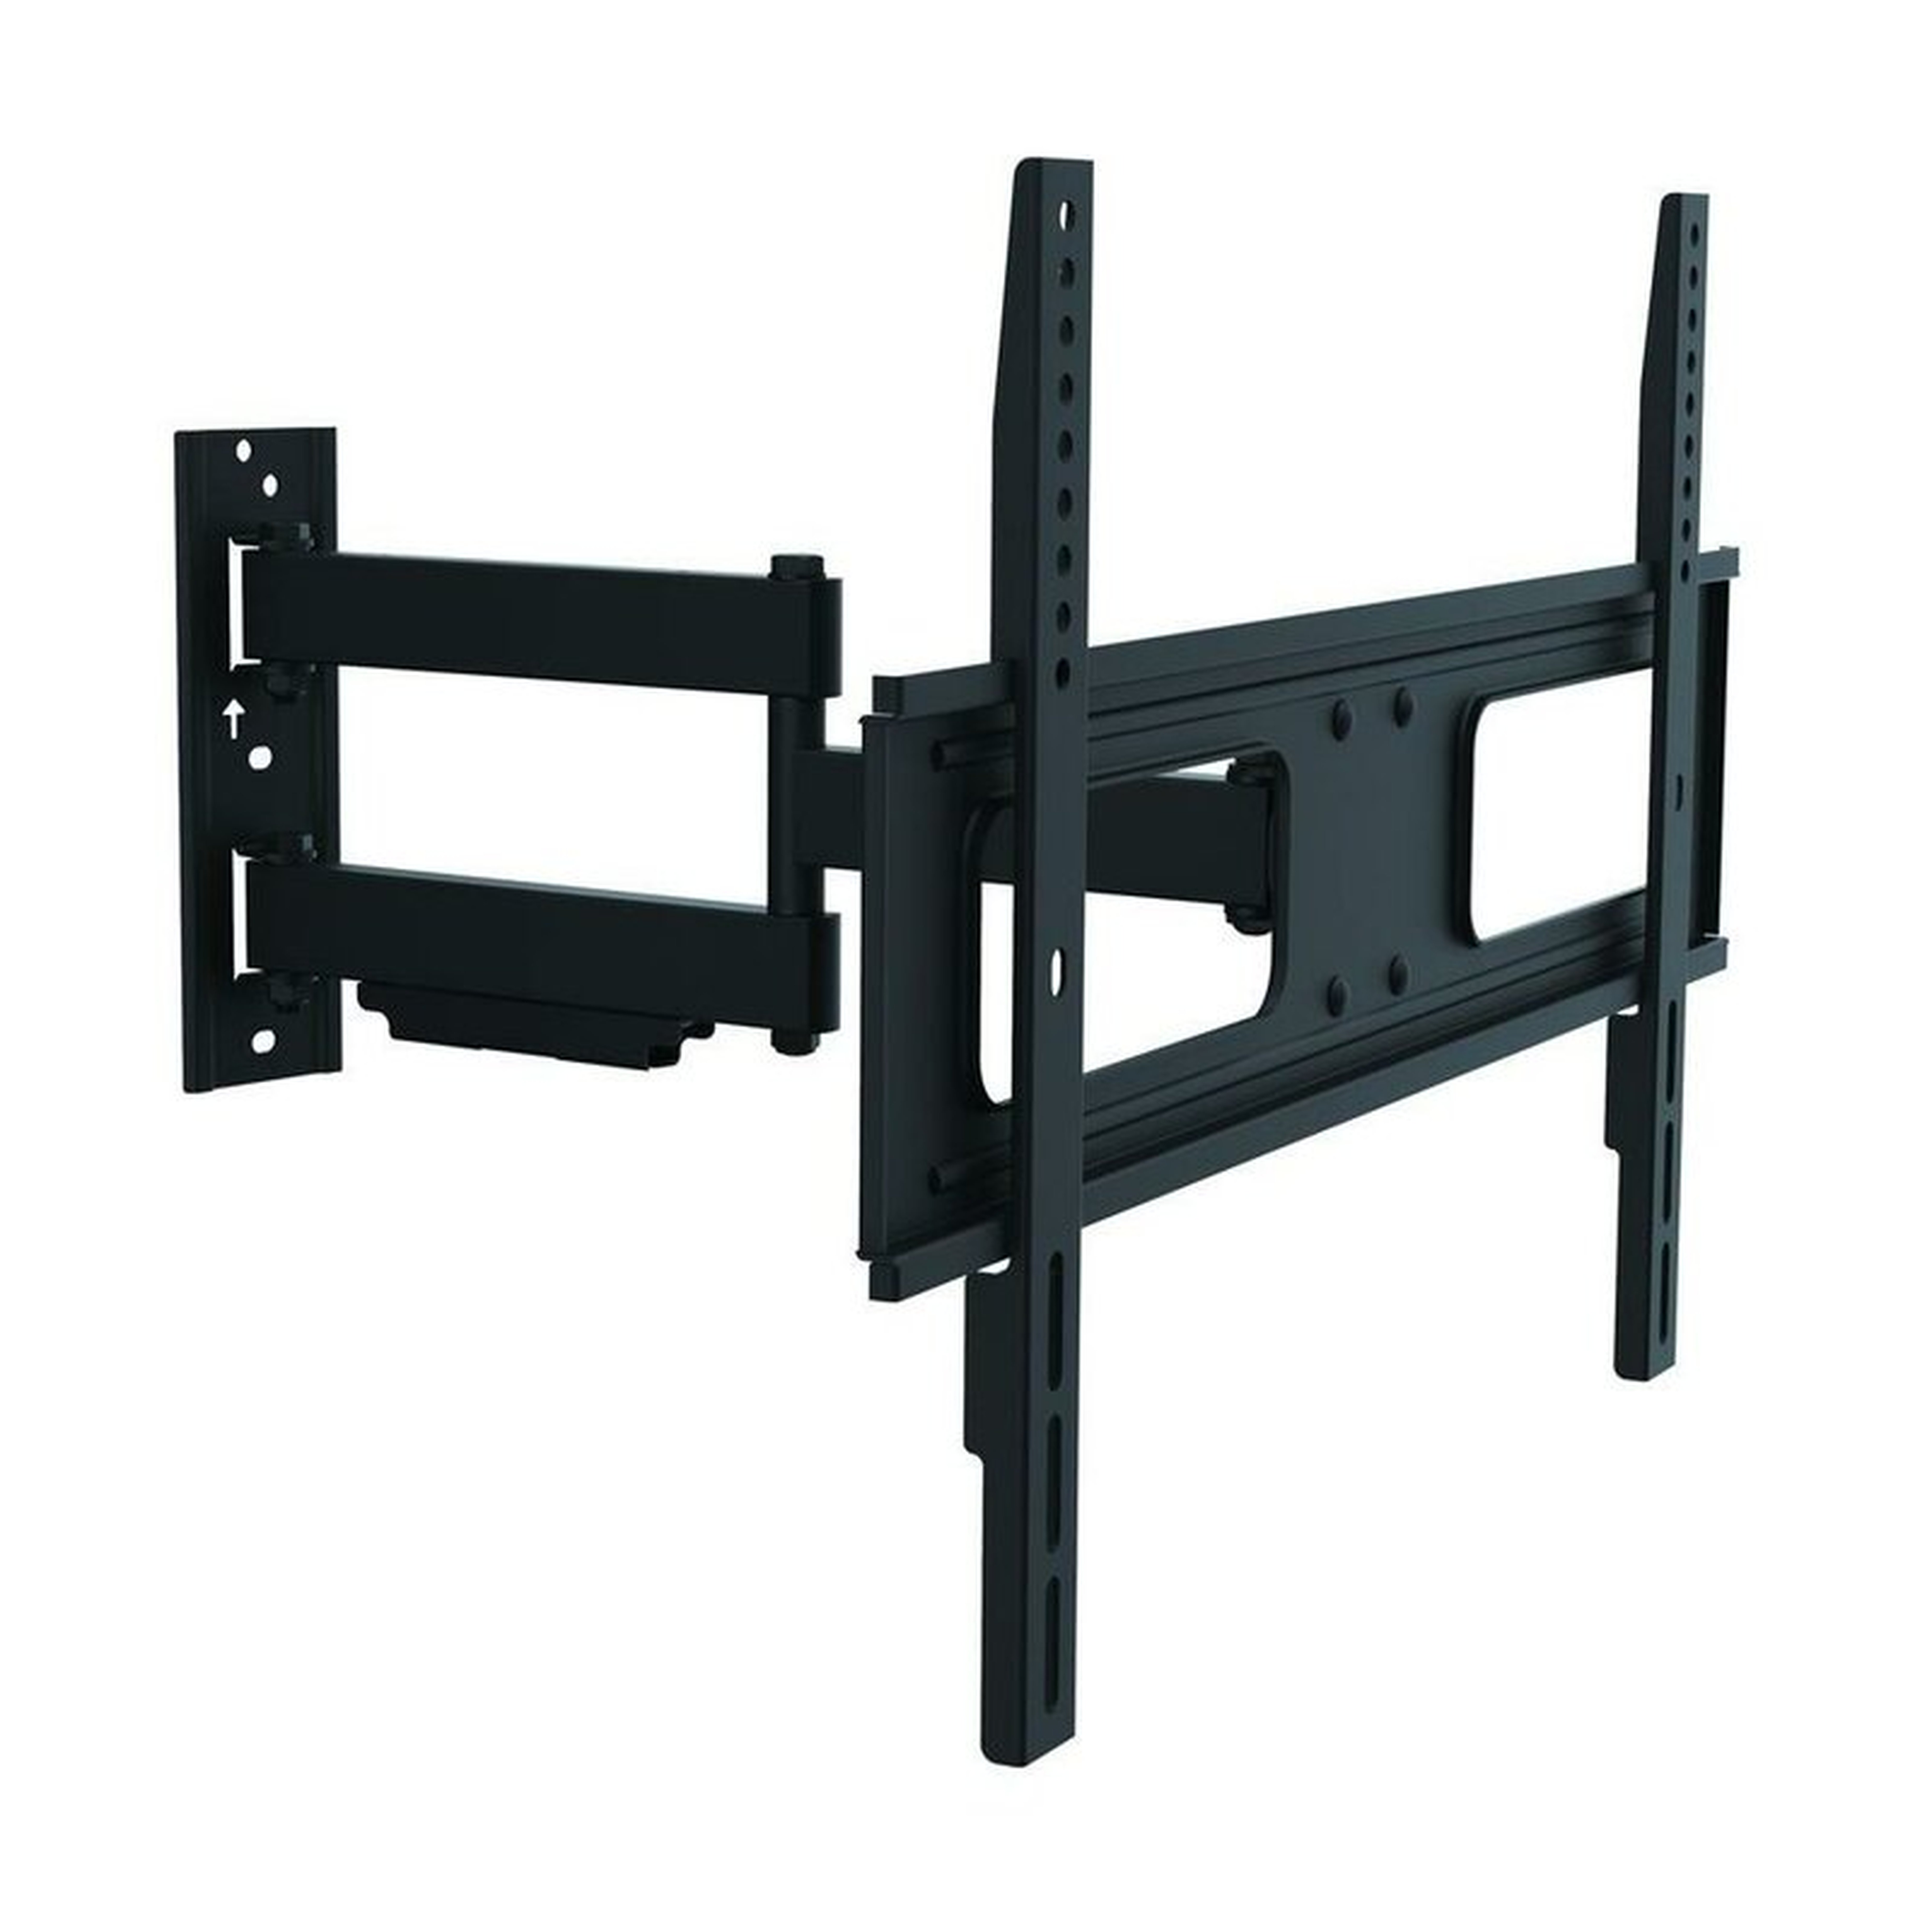 ProHT Full Motion TV Wall Mount for Curved & Flat Panel TVs Up to 70" - Wayfair